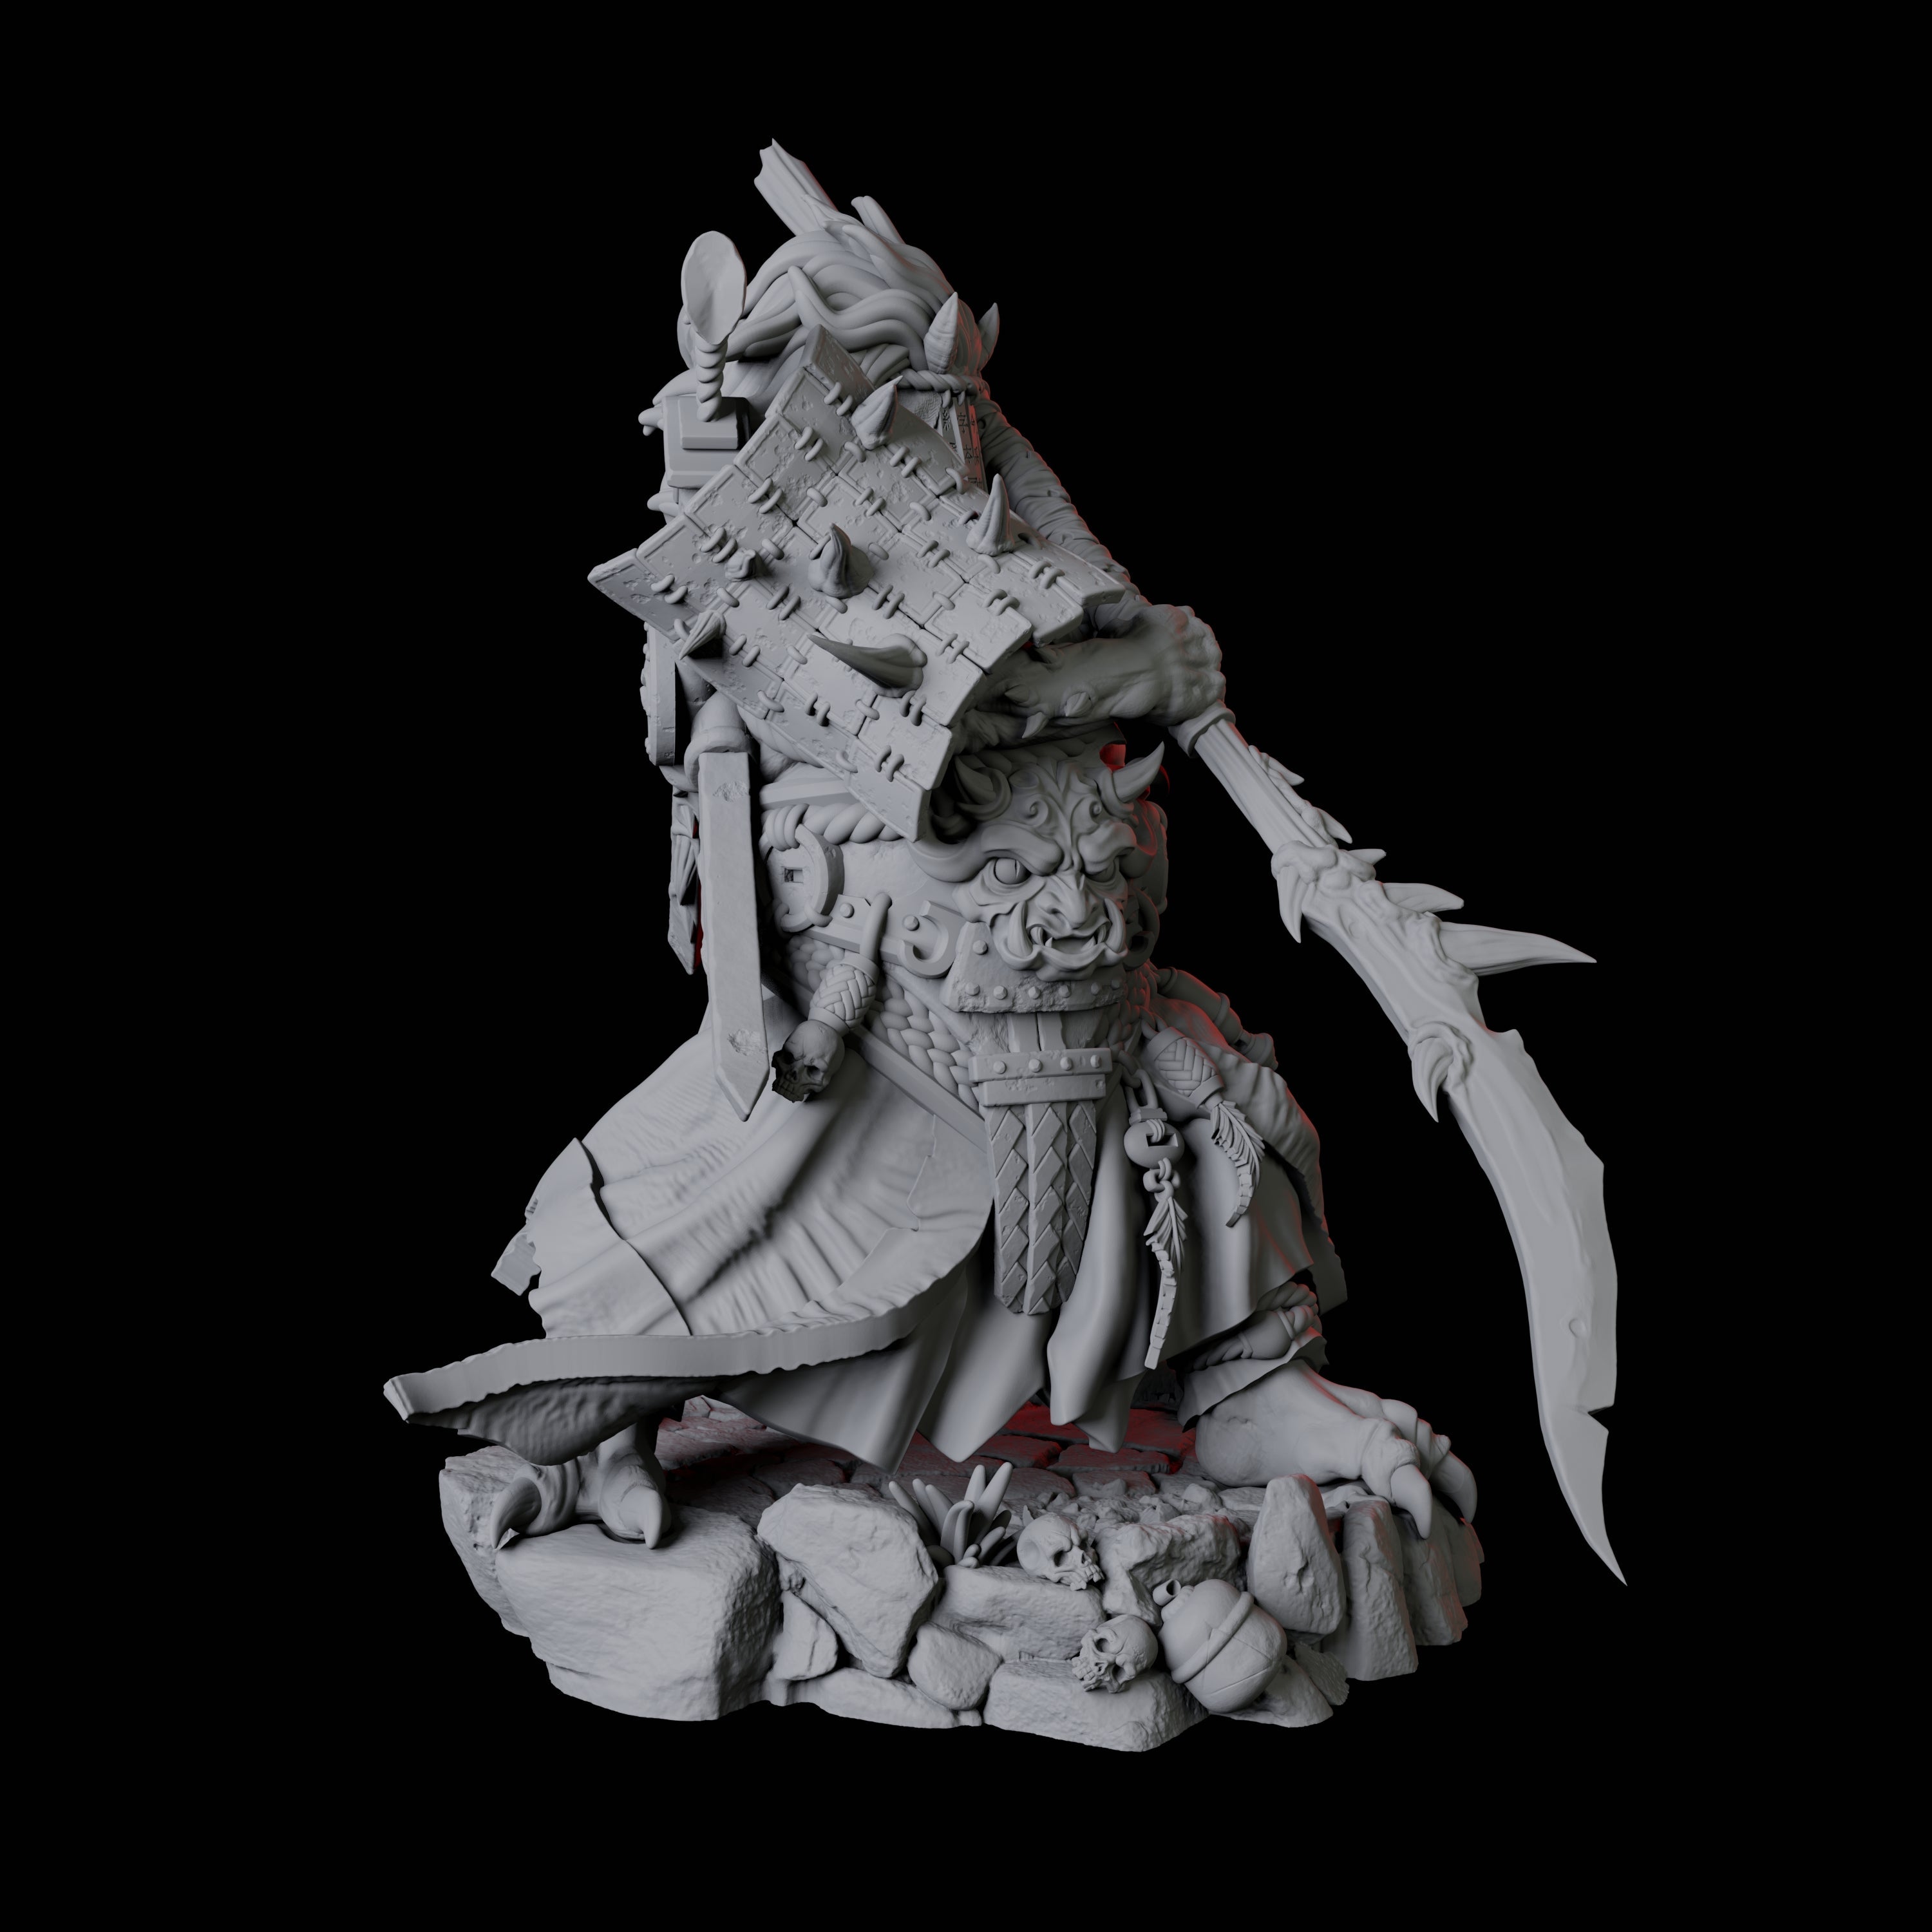 Towering Oni Demon B Miniature for Dungeons and Dragons, Pathfinder or other TTRPGs